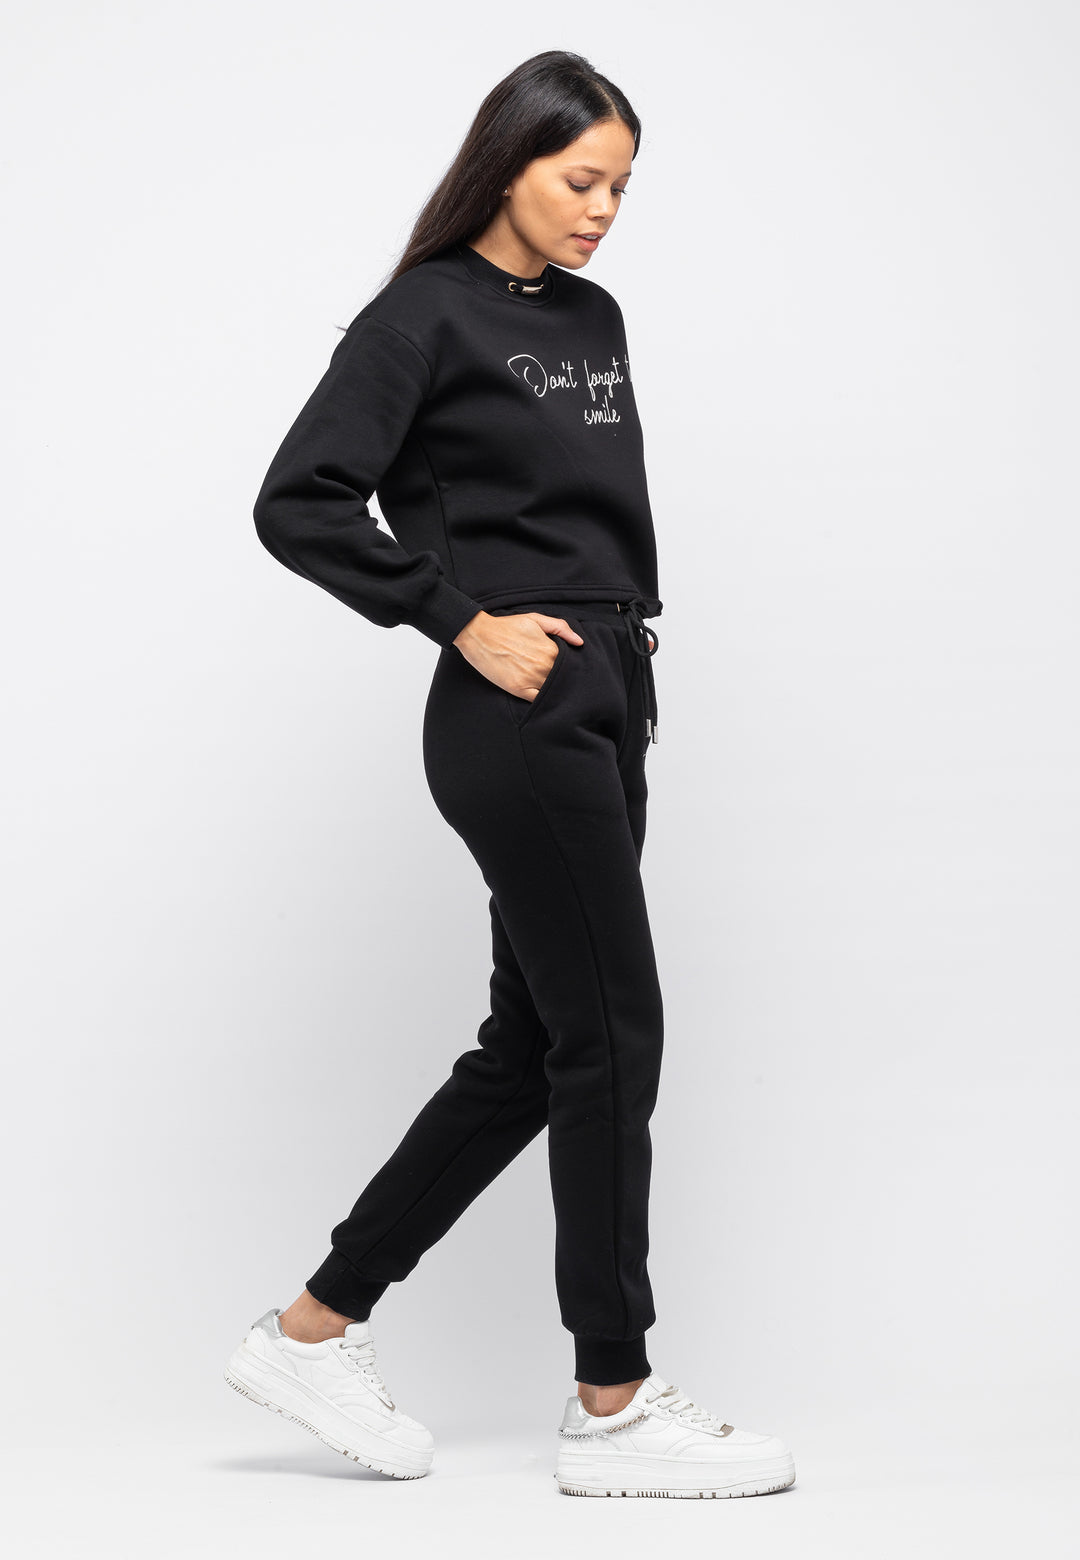 Tom Barron Ladies 'Smile' Embroidered Casual Tracksuit